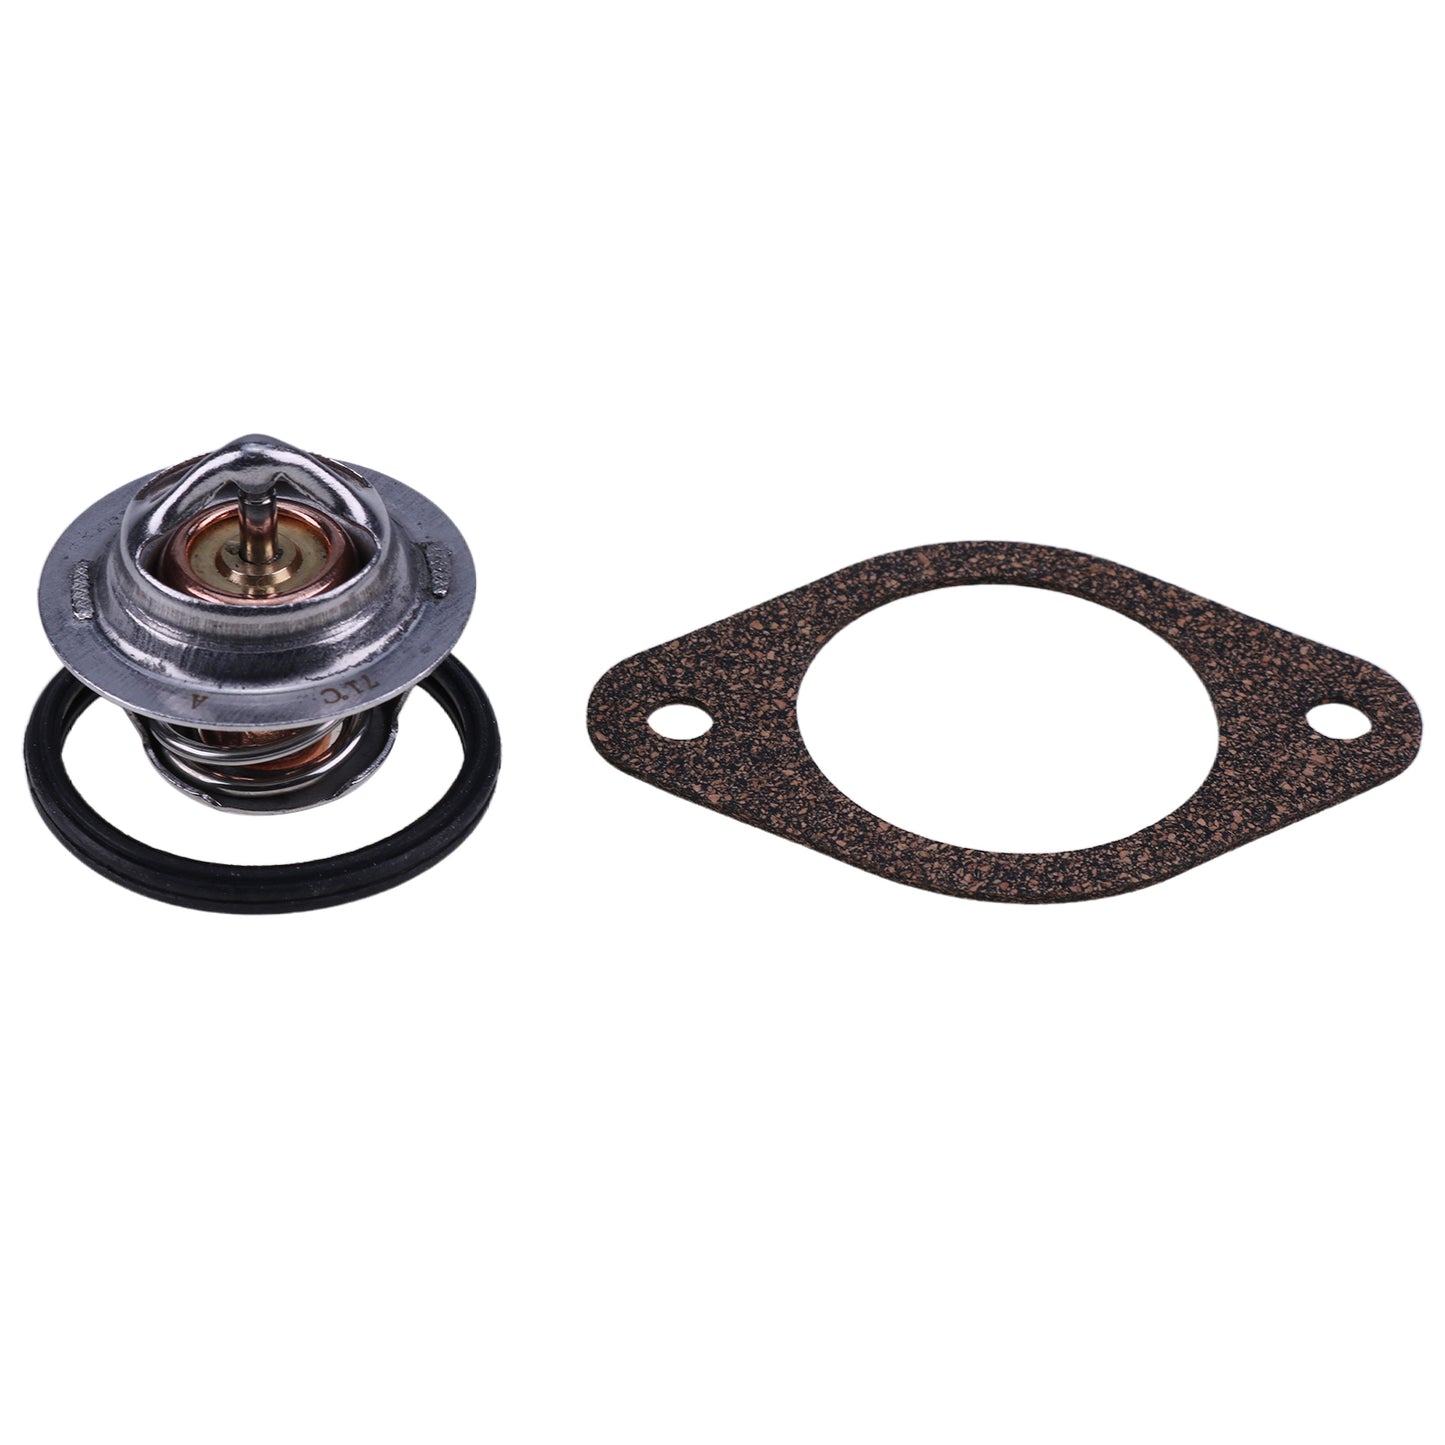 New SBA145206020 Thermostat & Gasket Compatible with Ford New Holland 1720 1920 1320 1520 1620 1715 3415 1510 1710